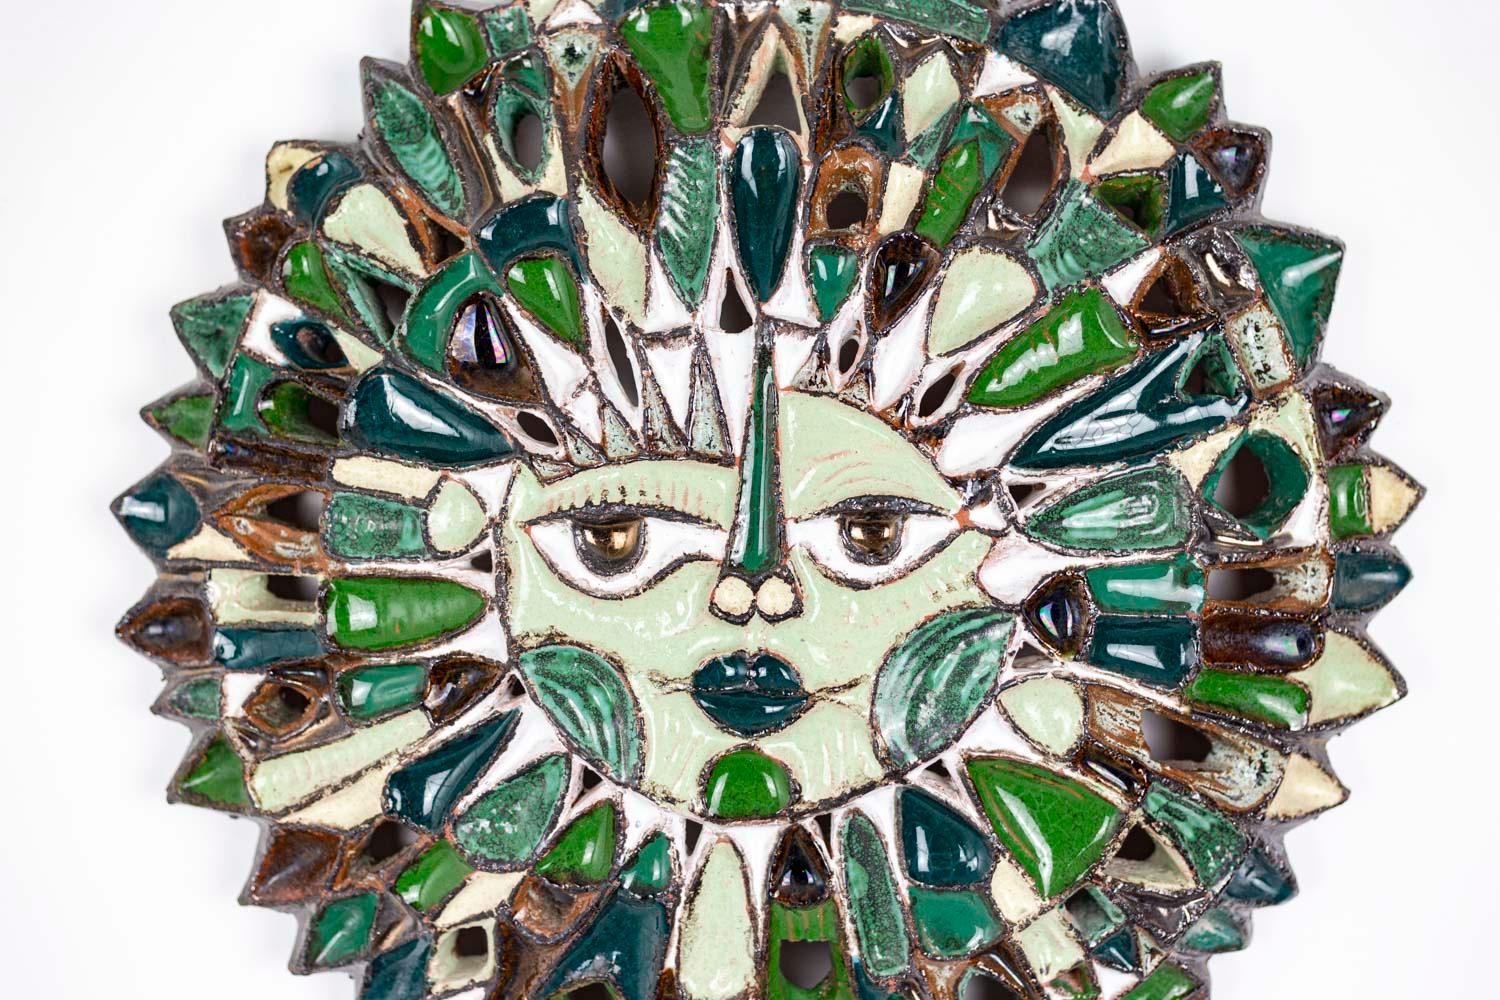 Roland Zobel, attributed to.

Sun-shaped mask in ceramic, with green-blue polychromed enamels. Central face highlighted with white enamel. Open spaces between the rays emanated from the face. 

Signed 